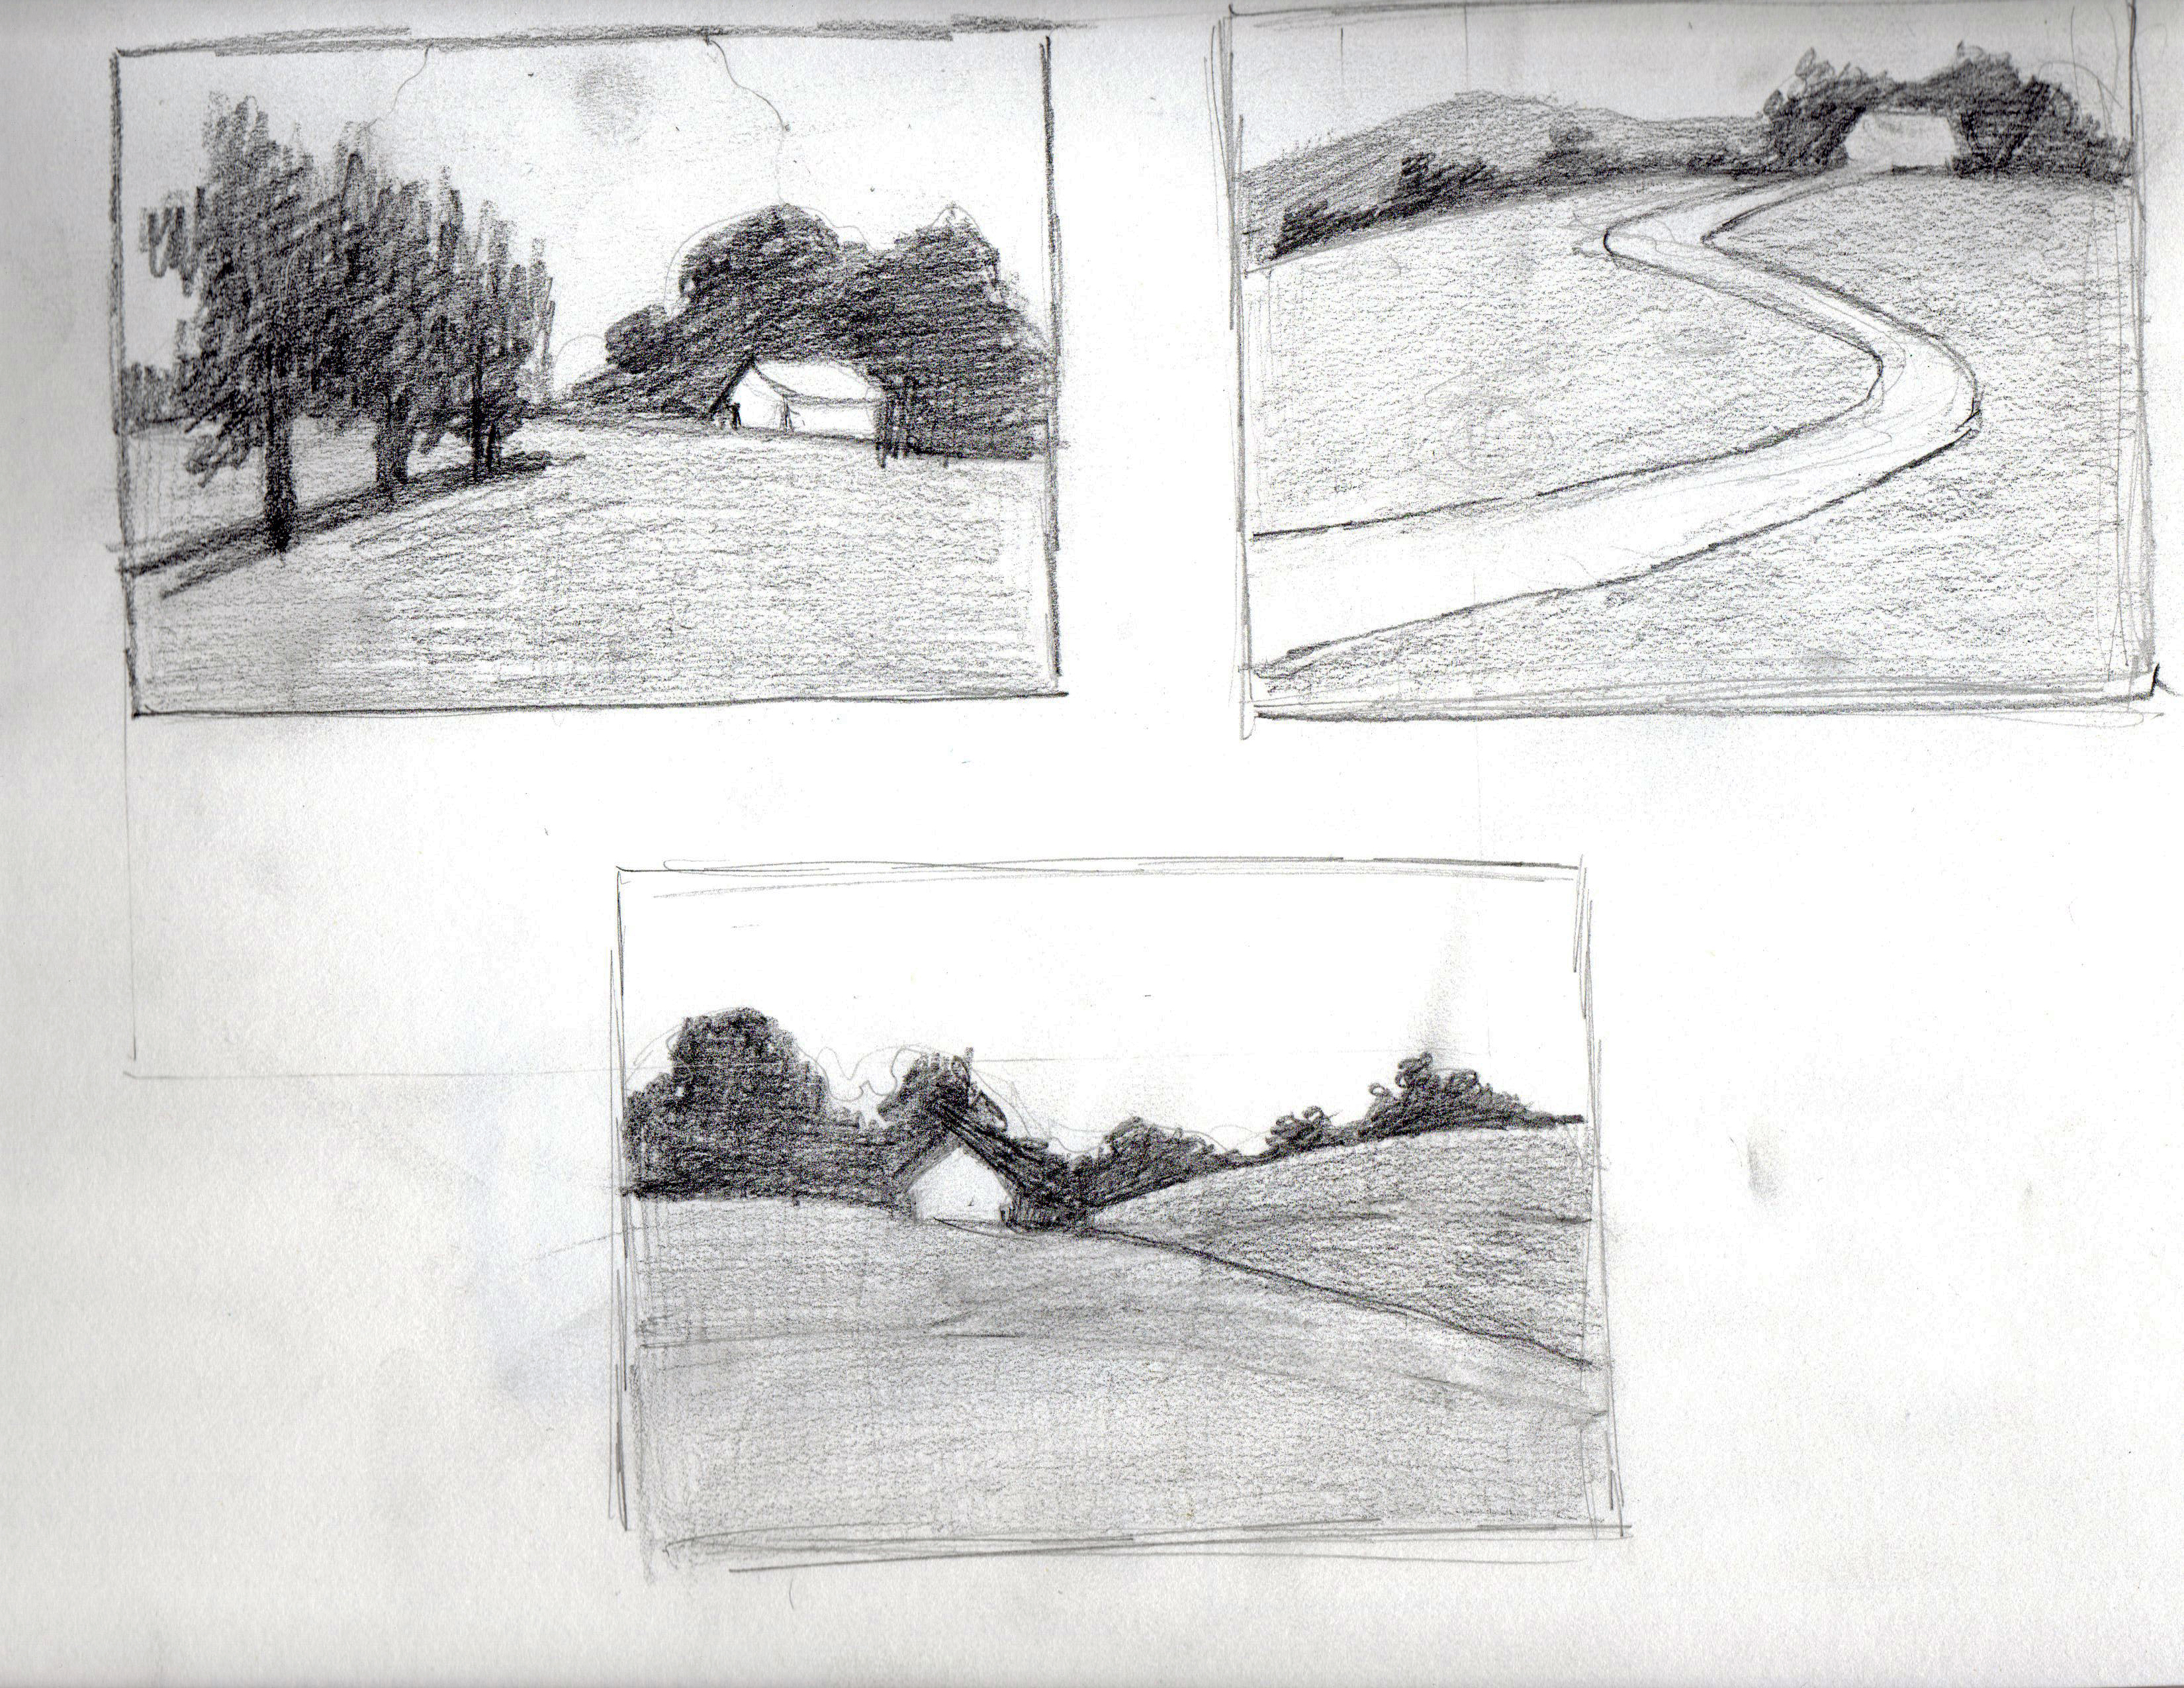 PAINTING LANDSCAPES  THE THUMBNAIL SKETCH  Stafford ArtWorks